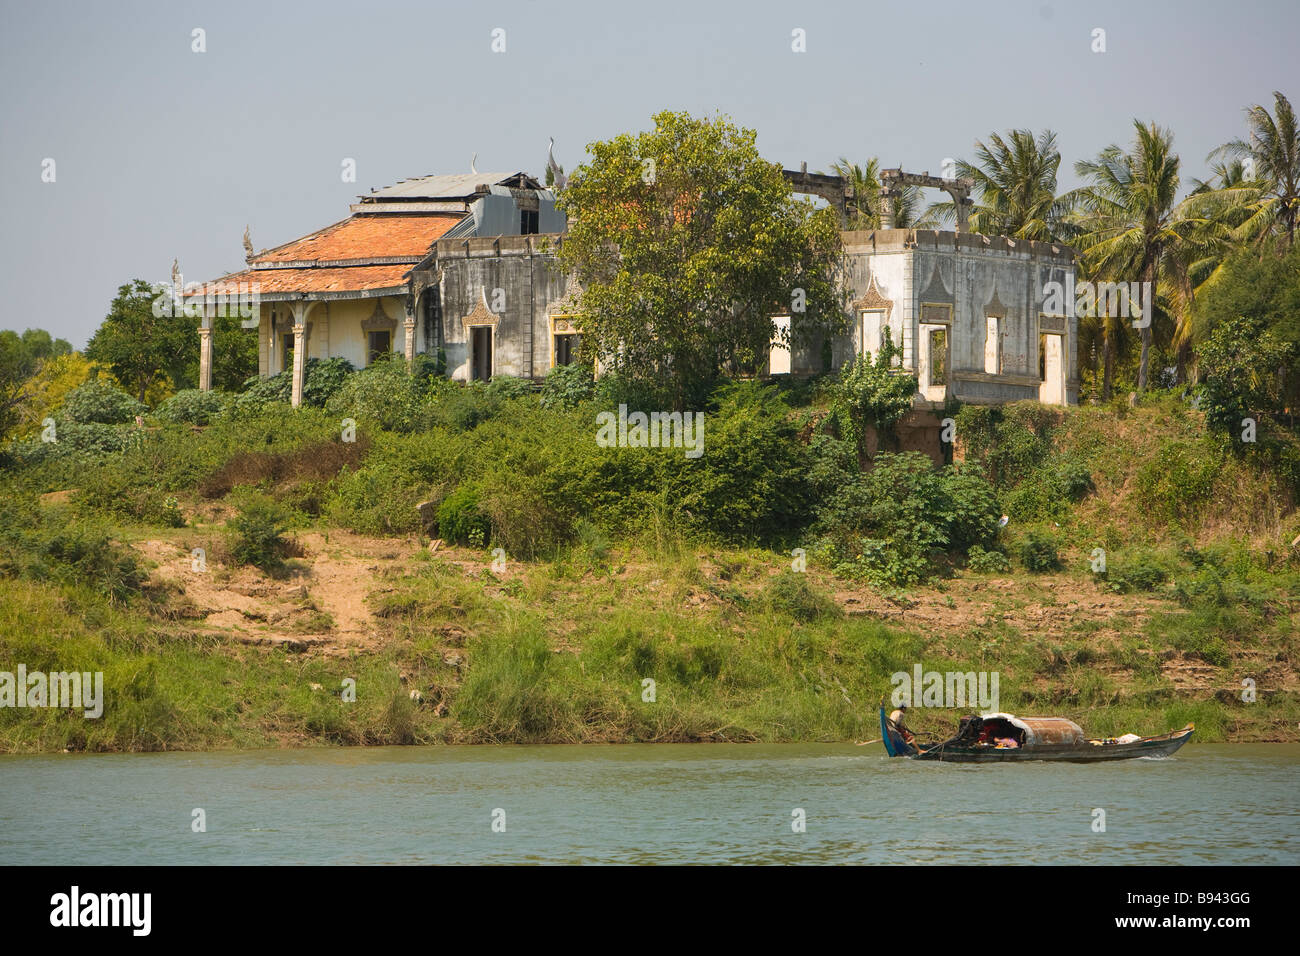 Old Cambodia house Photographed from the Mekong River Phnom Penh Cambodia Stock Photo